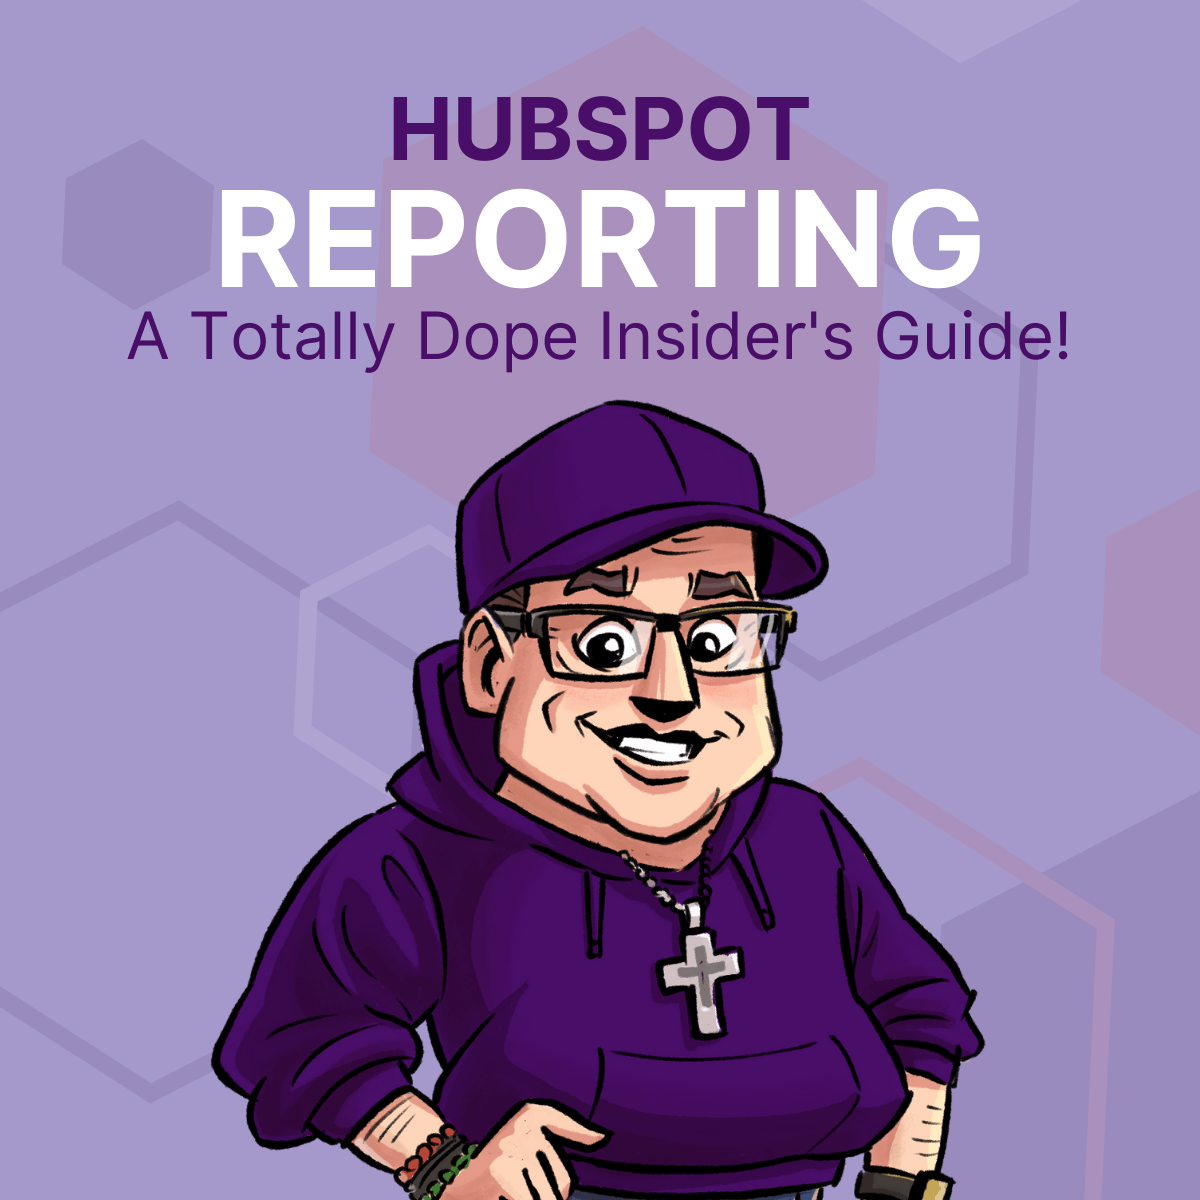 George's totally dope insider's guide to HubSpot reporting (+ examples)